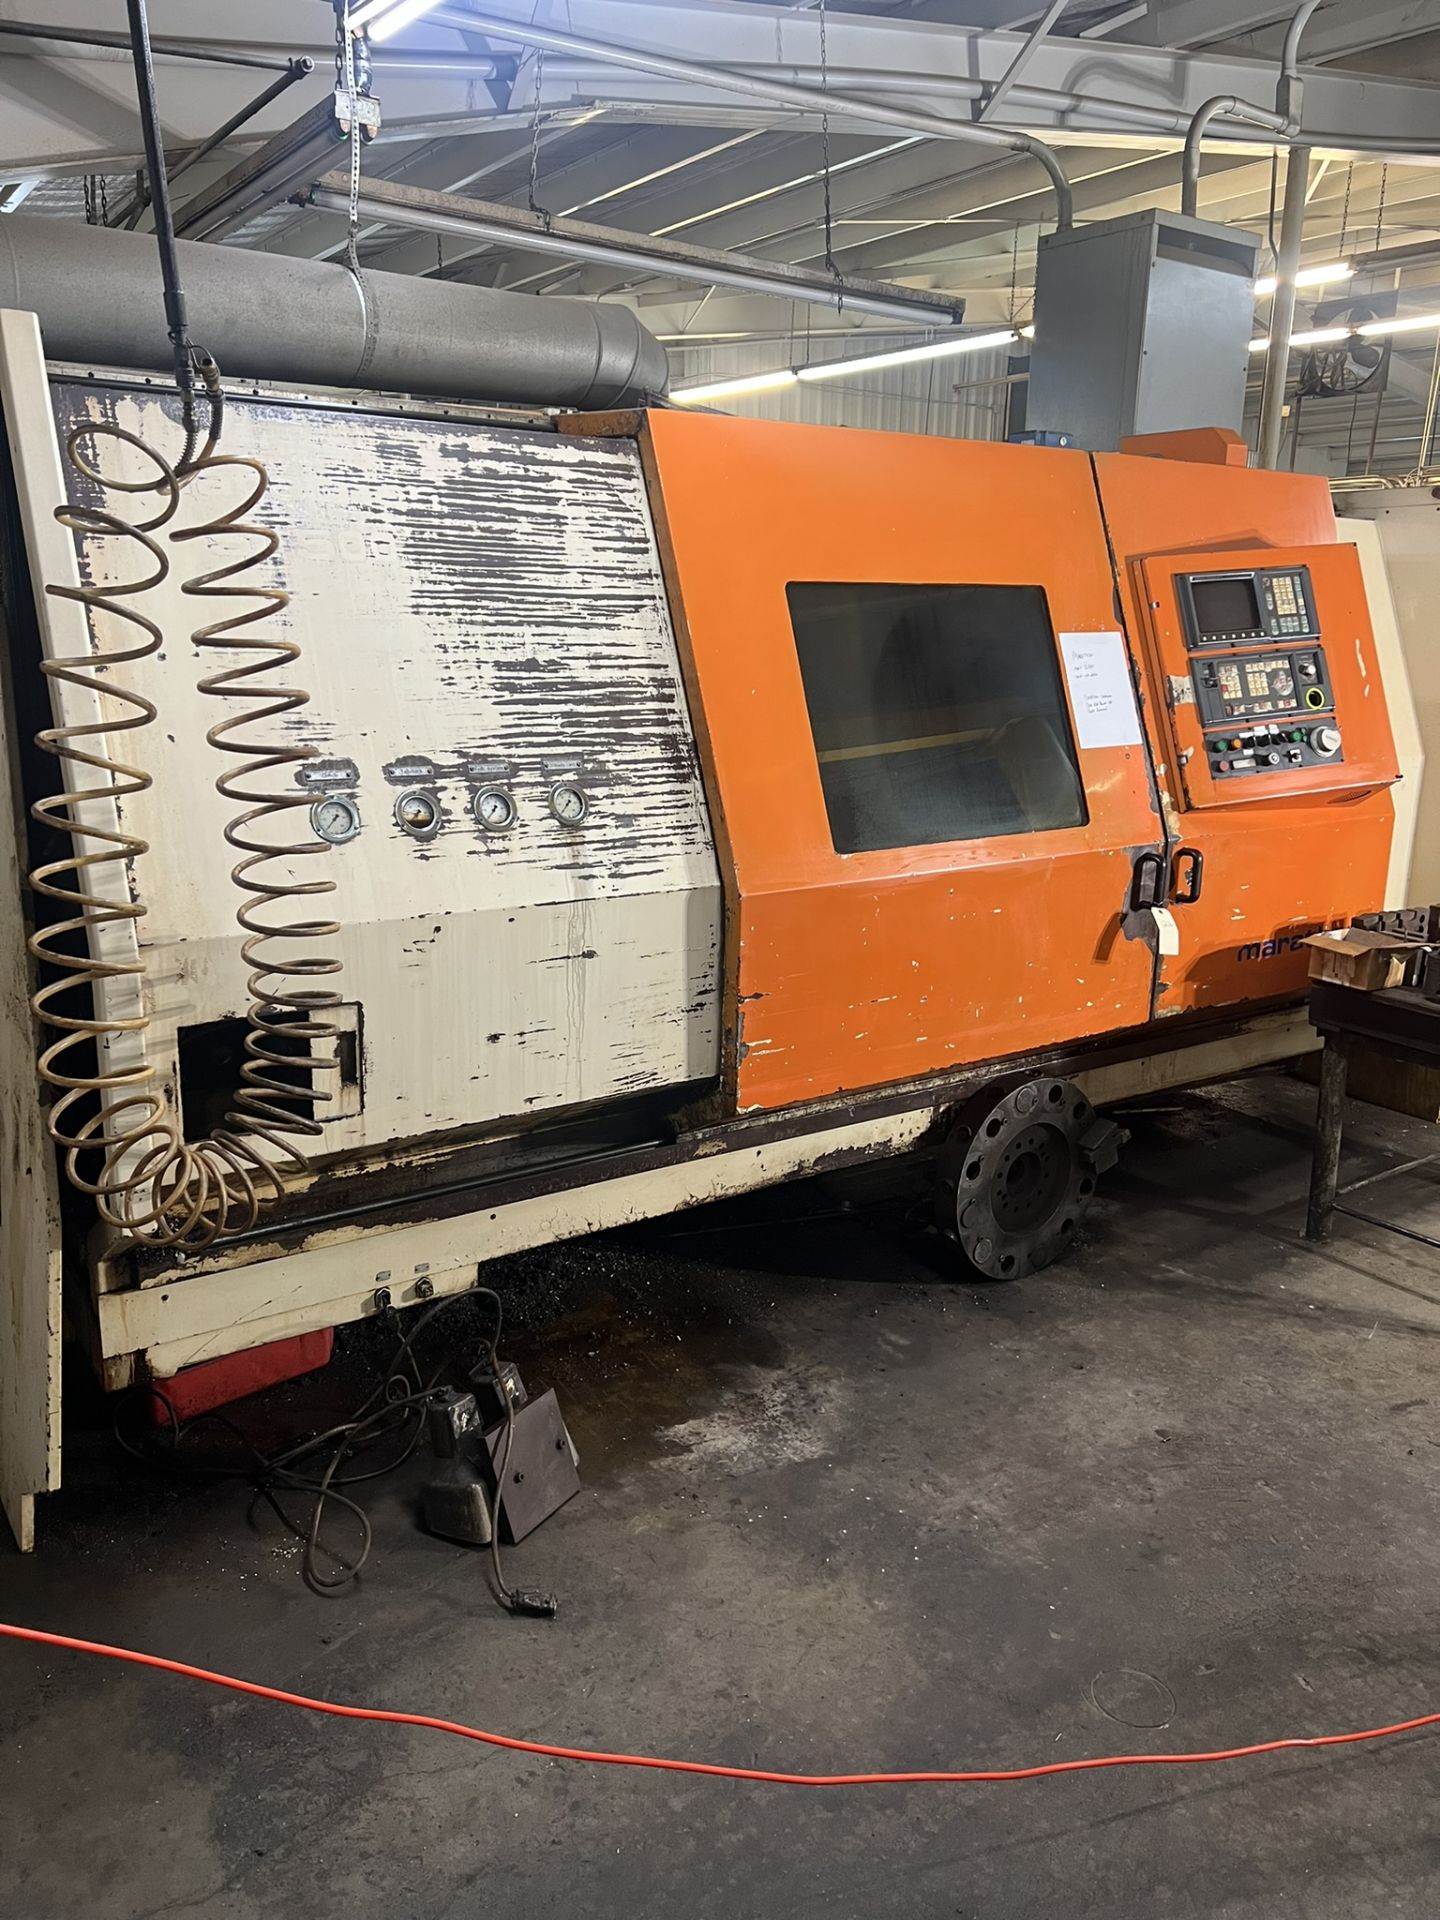 1993 Marathon CNC Model SL500, does not power on, may be missing some parts Serial#21-2402